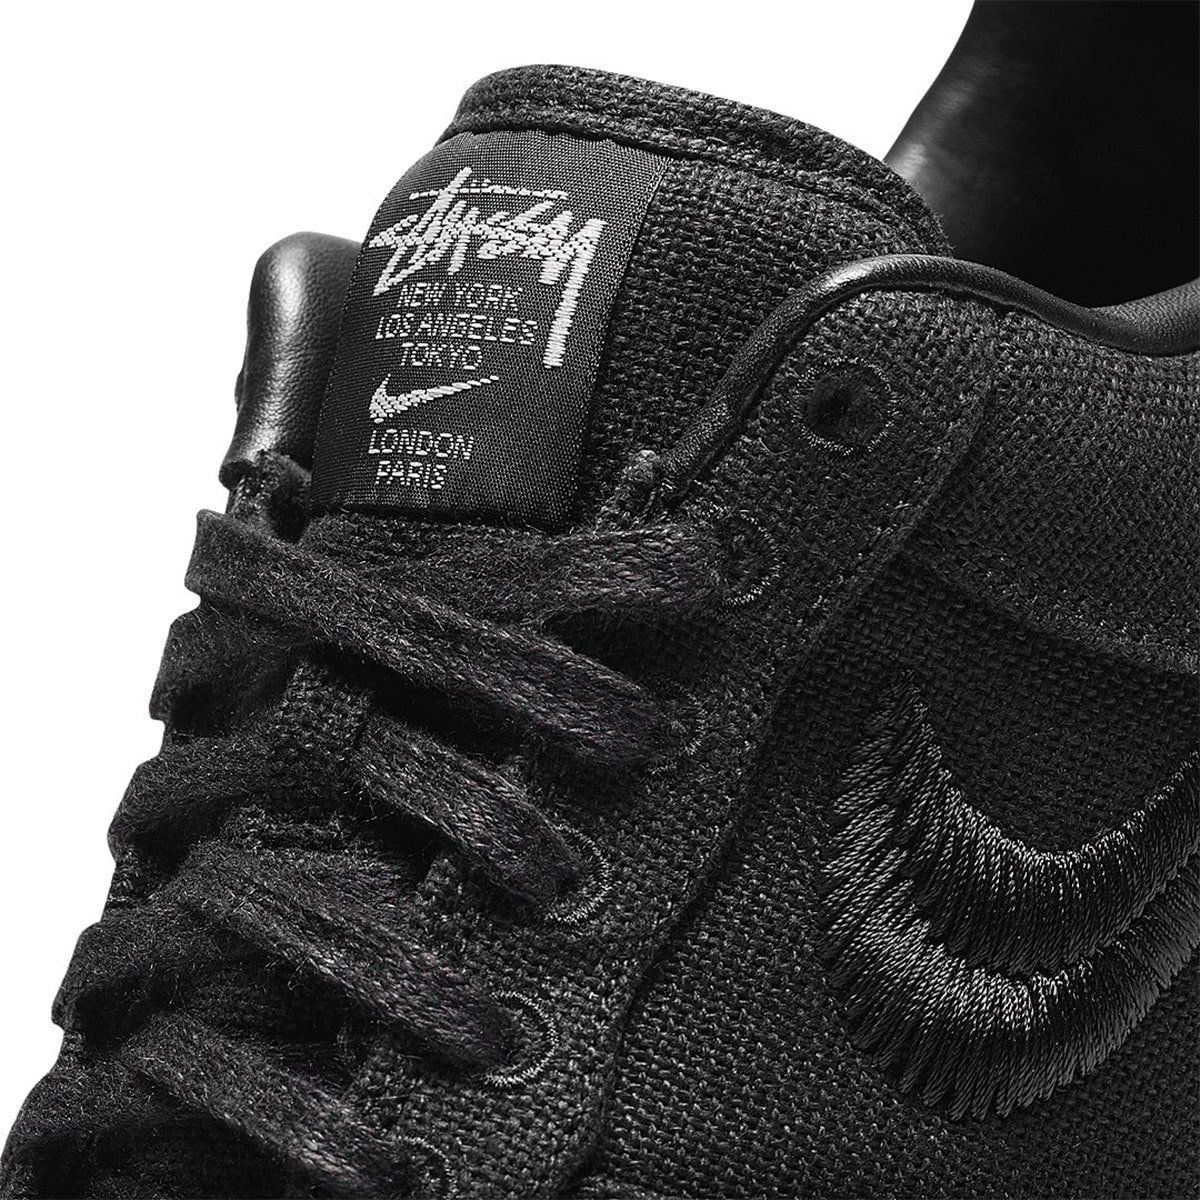 Stussy x Air Force 1 Collaboration Drops Dec. 11 - HOUSE OF HEAT